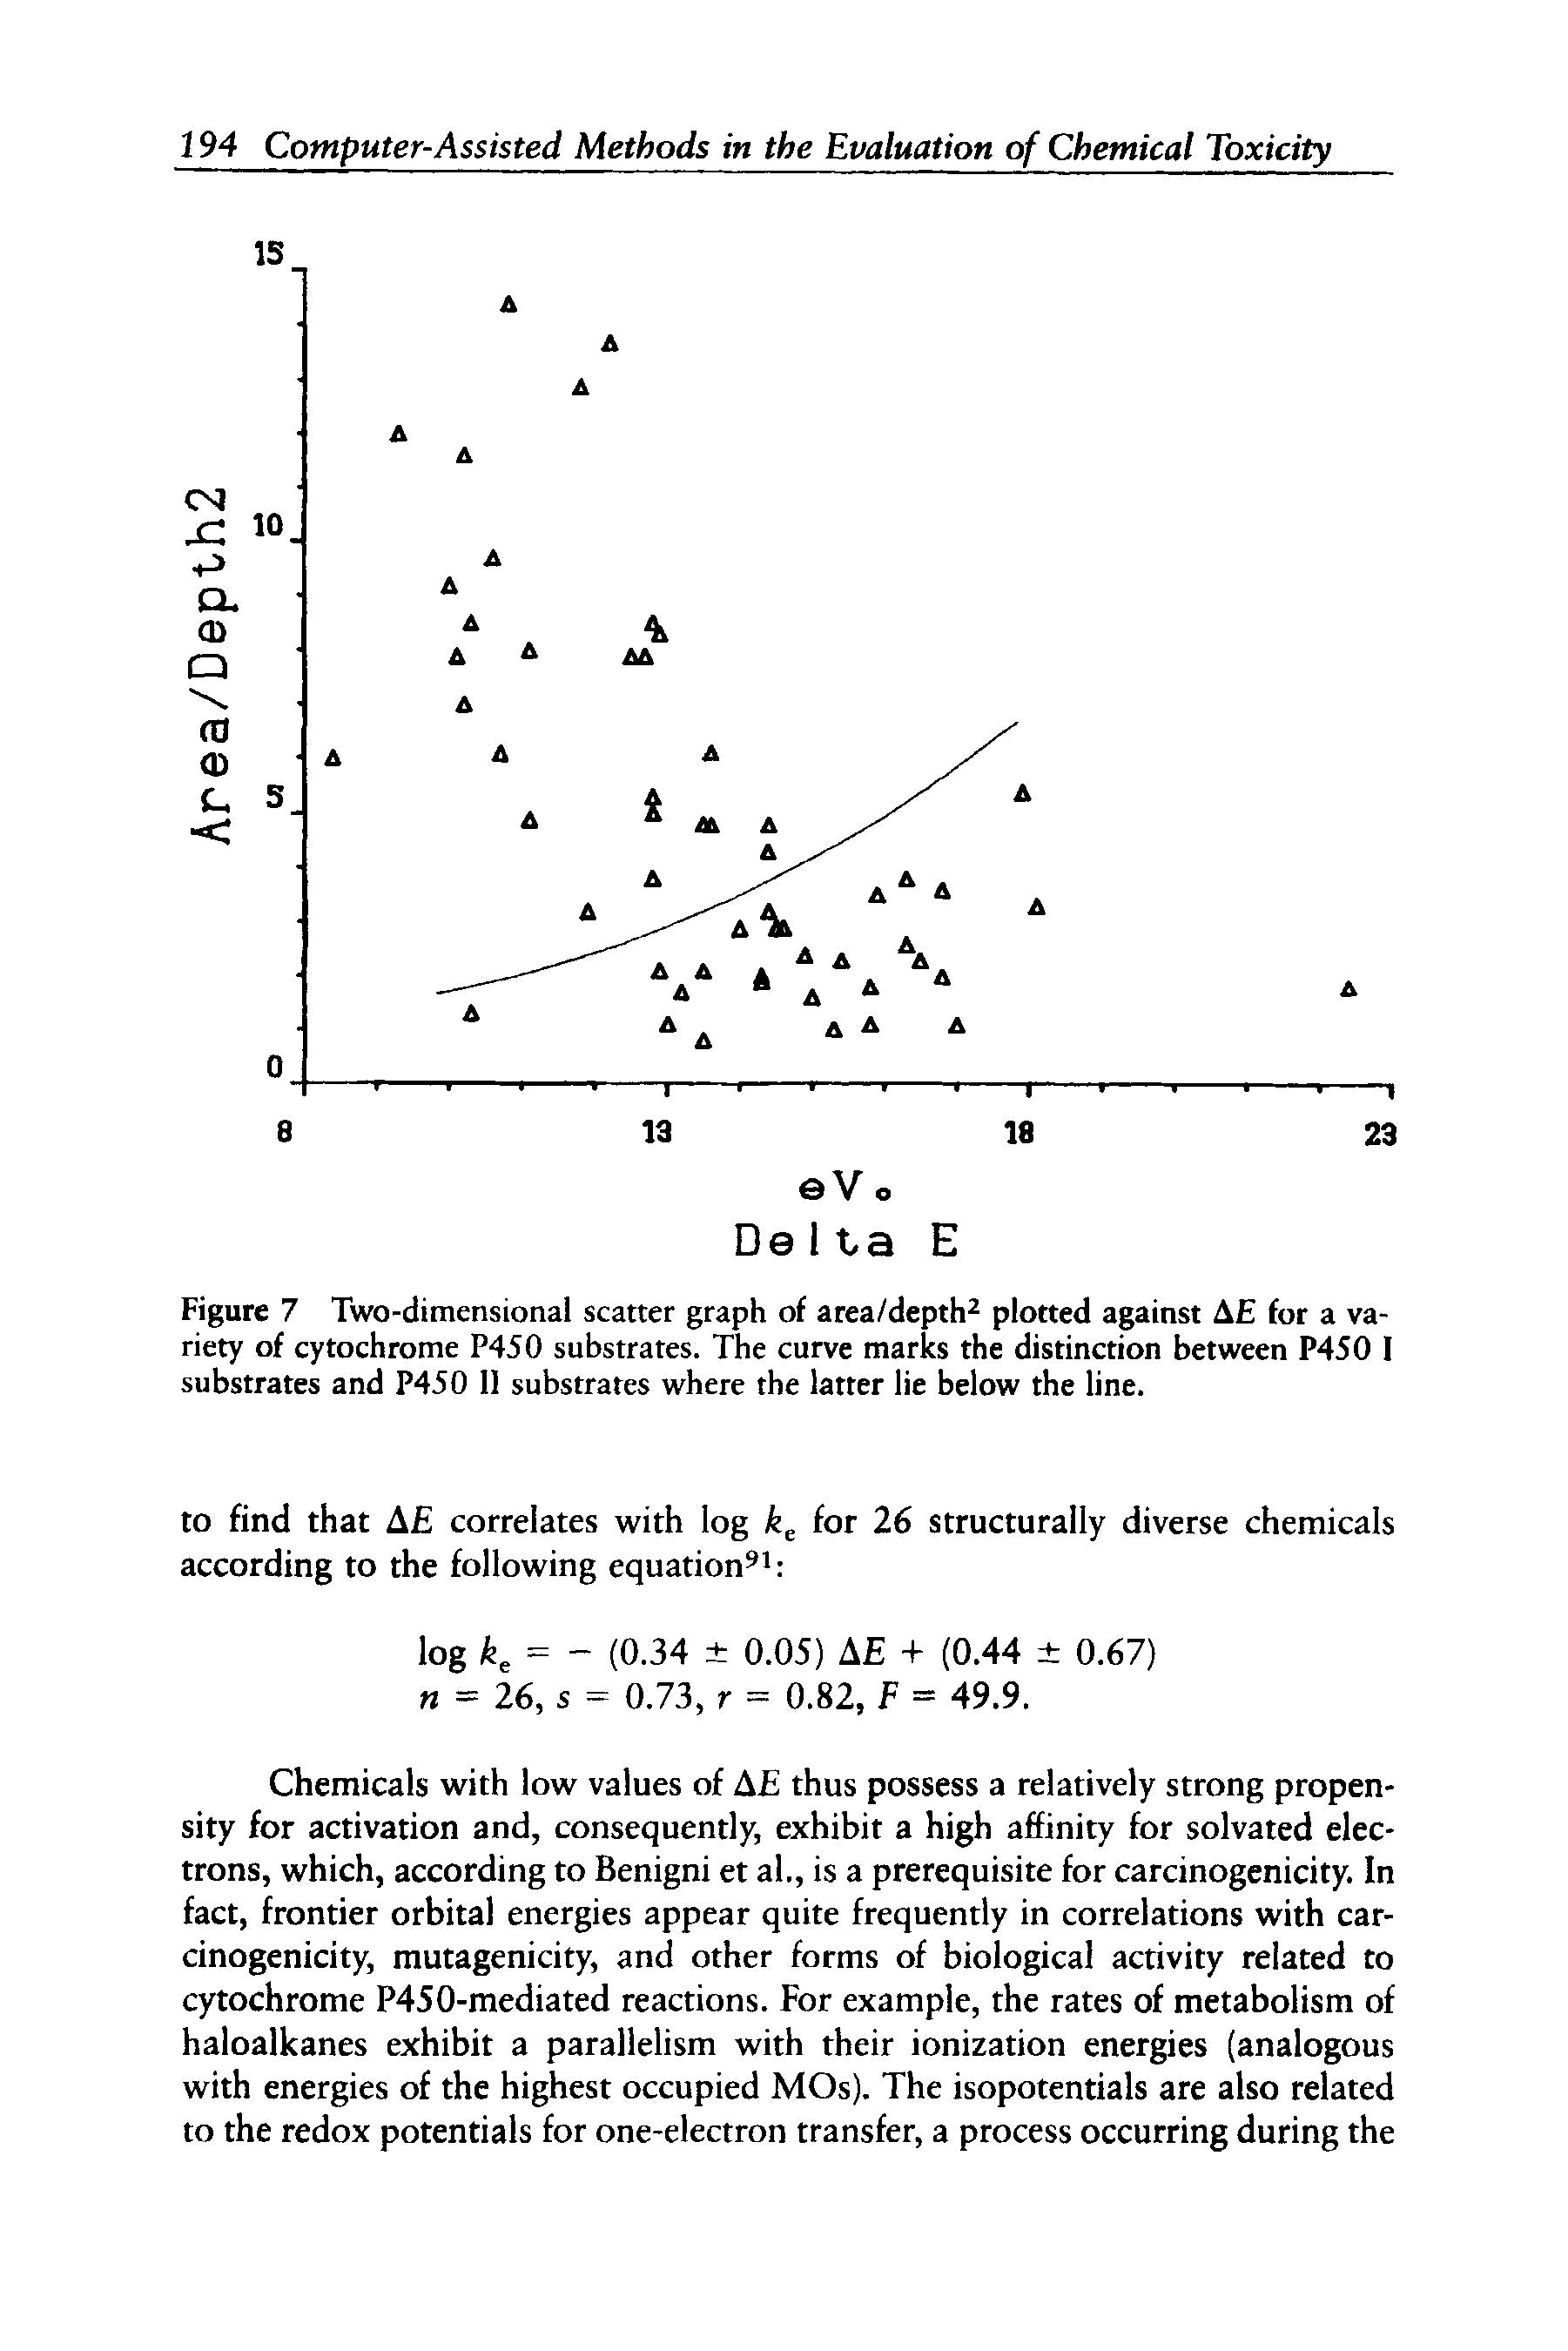 Figure 7 Two-dimensional scatter graph of area/depth2 plotted against A for a variety of cytochrome P450 substrates. The curve marks the distinction between P450 I substrates and P450 11 substrates where the latter lie below the line.